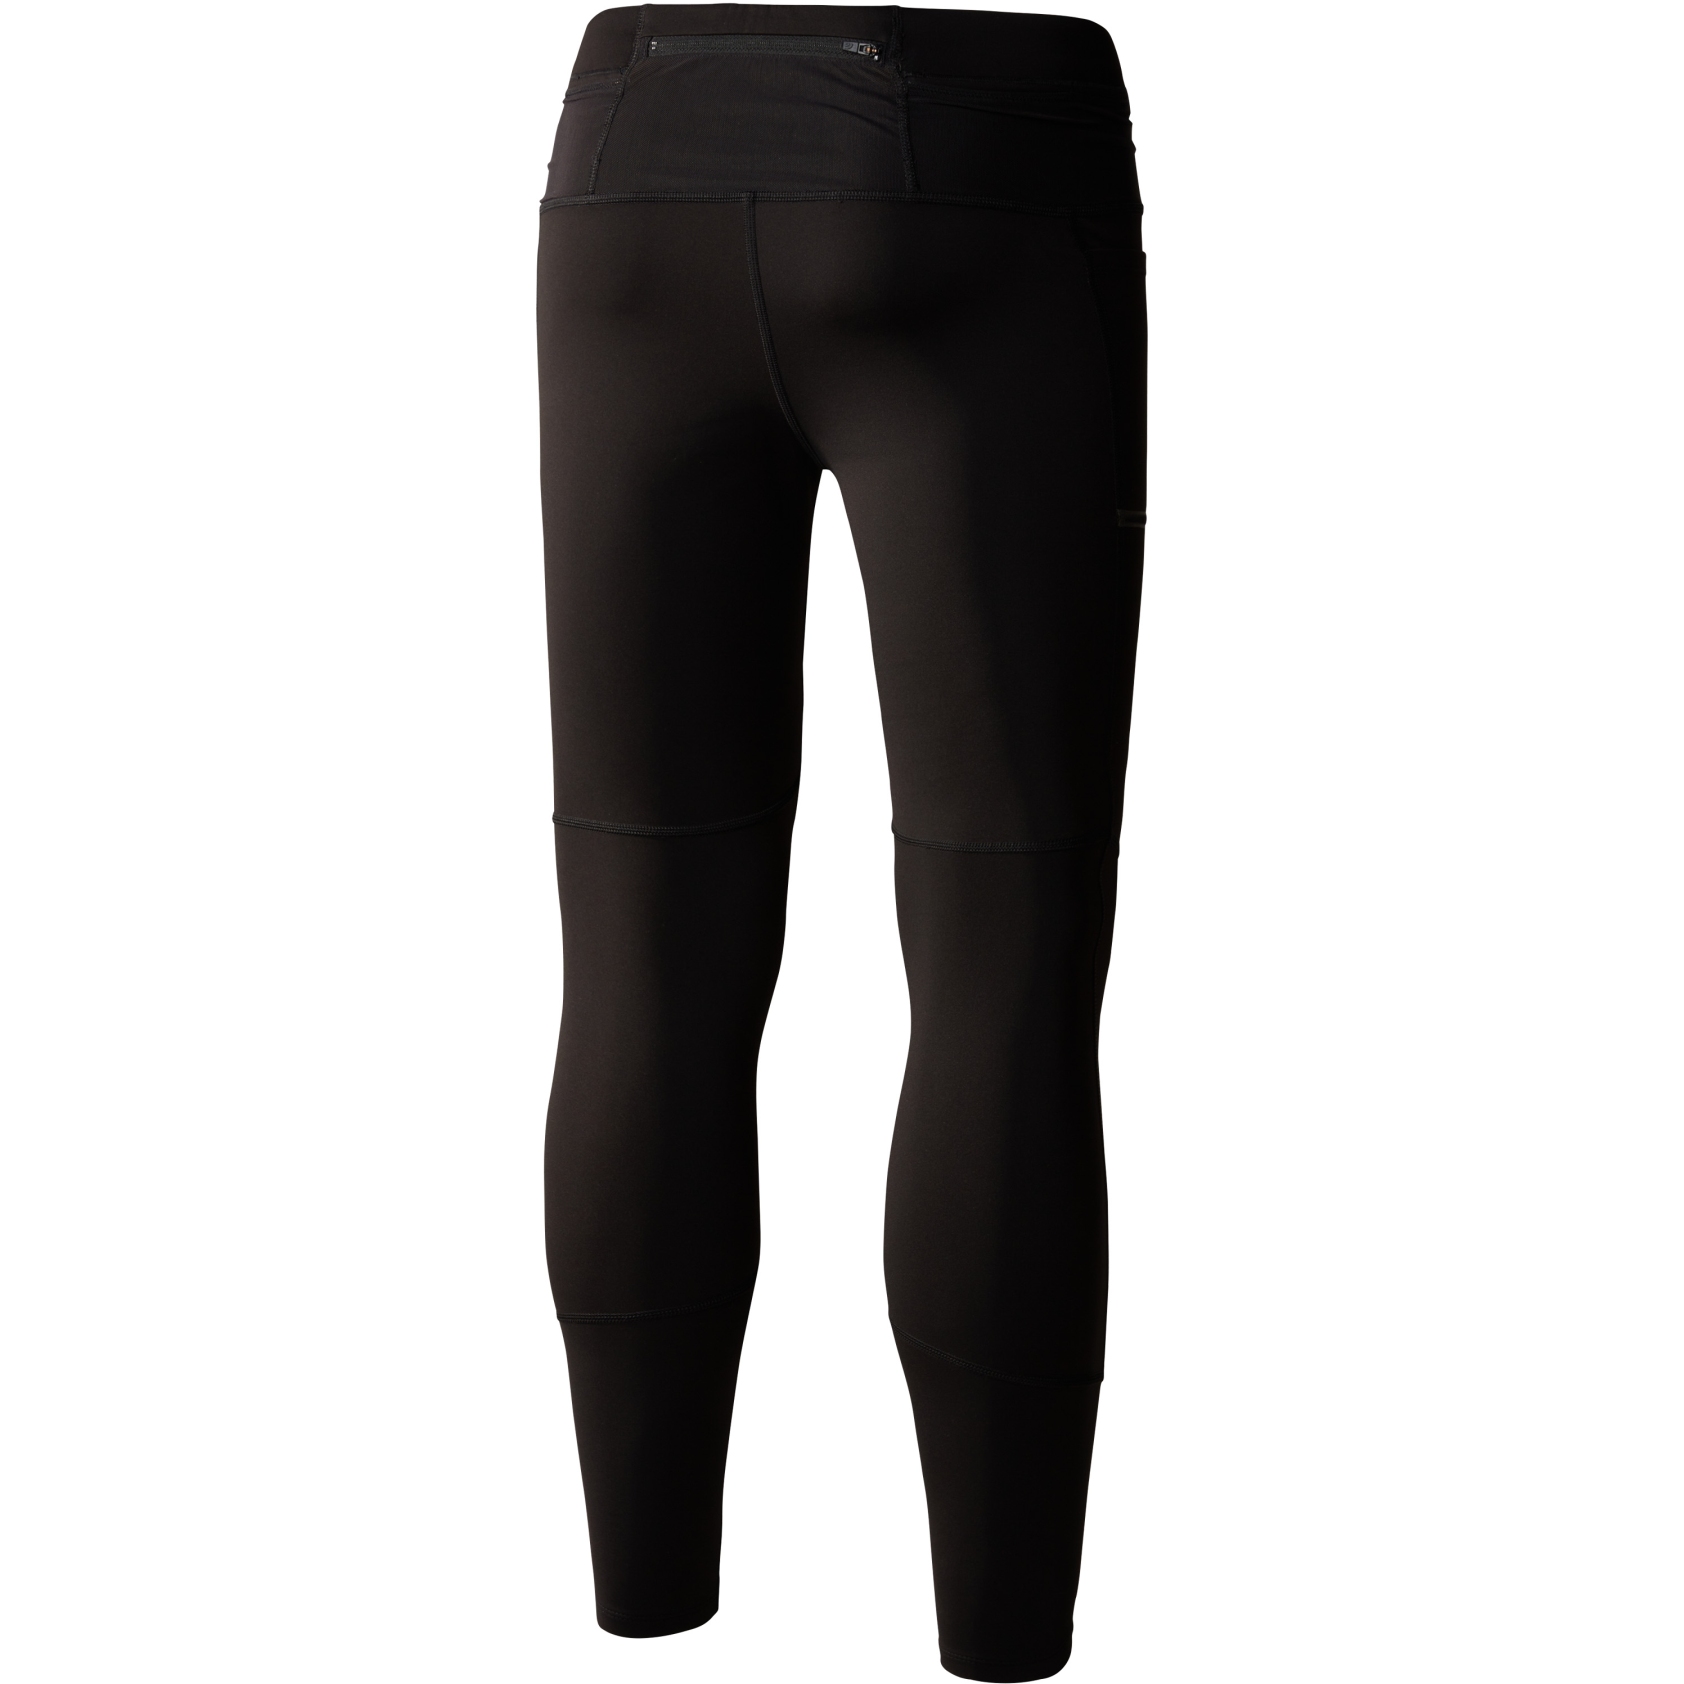 The North Face Winter Warm Pro Tight - Running trousers Men's